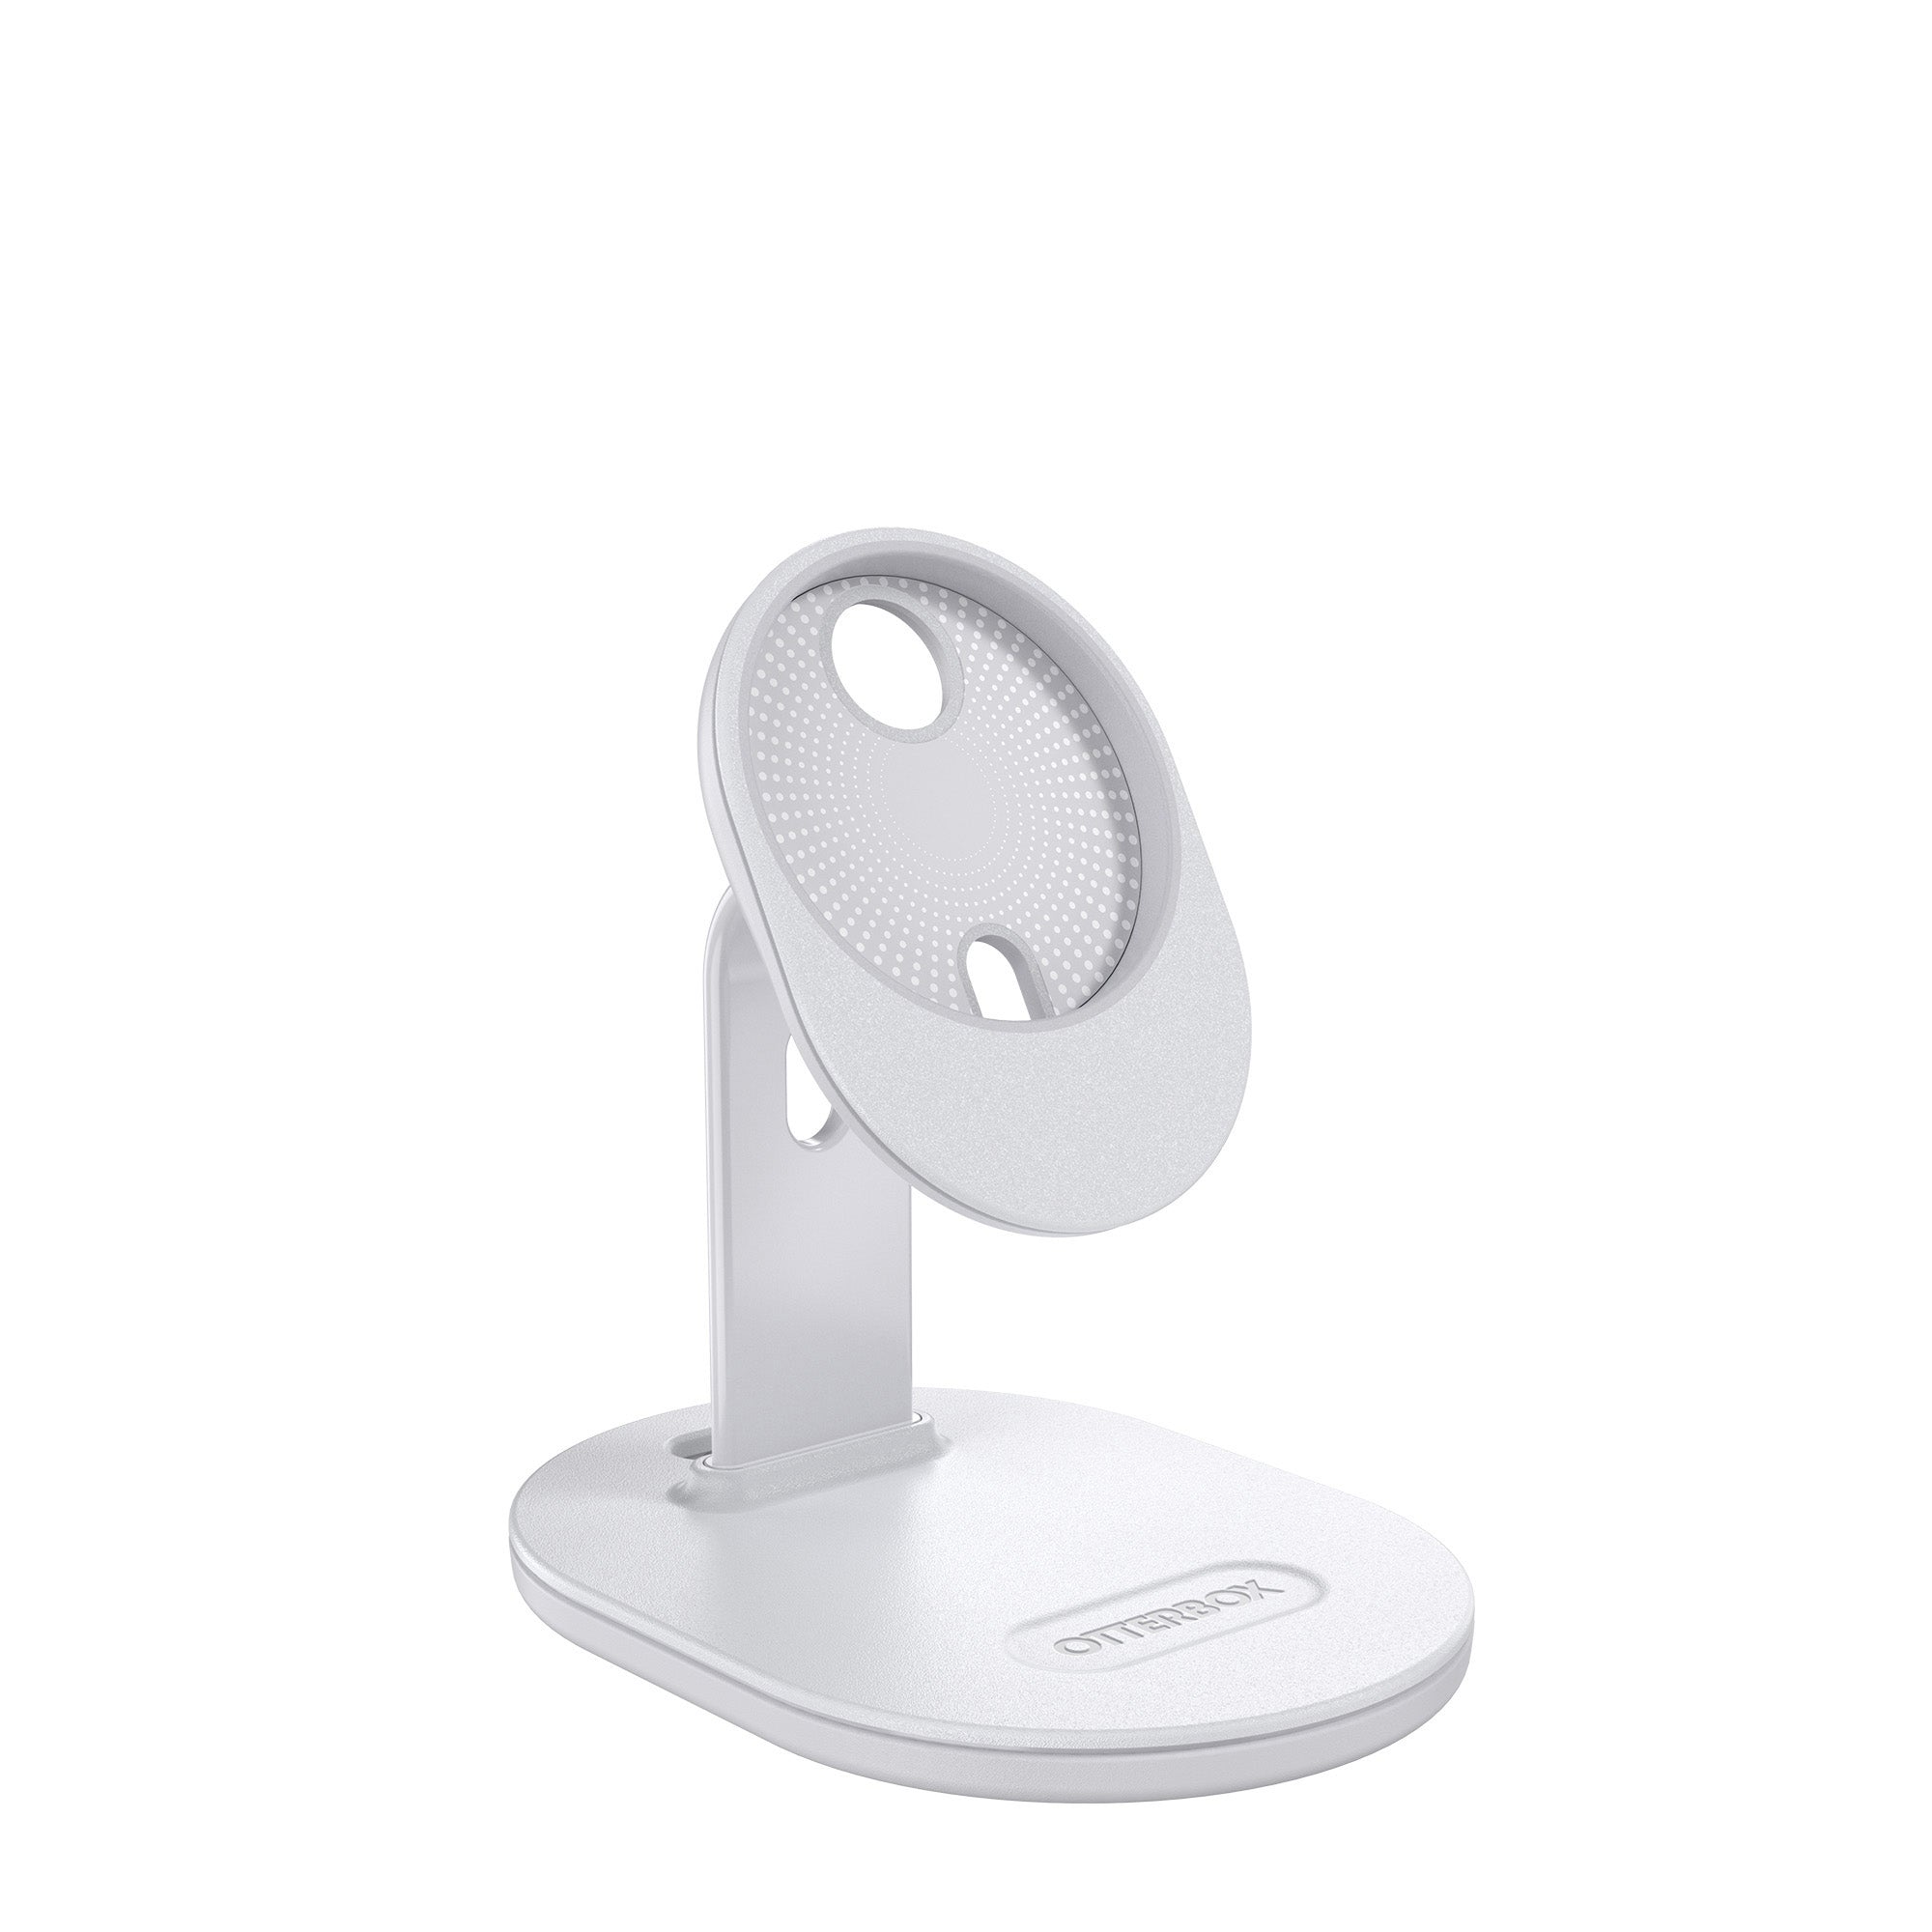 OtterBox Stand for MagSafe Charger - White - 15-09407